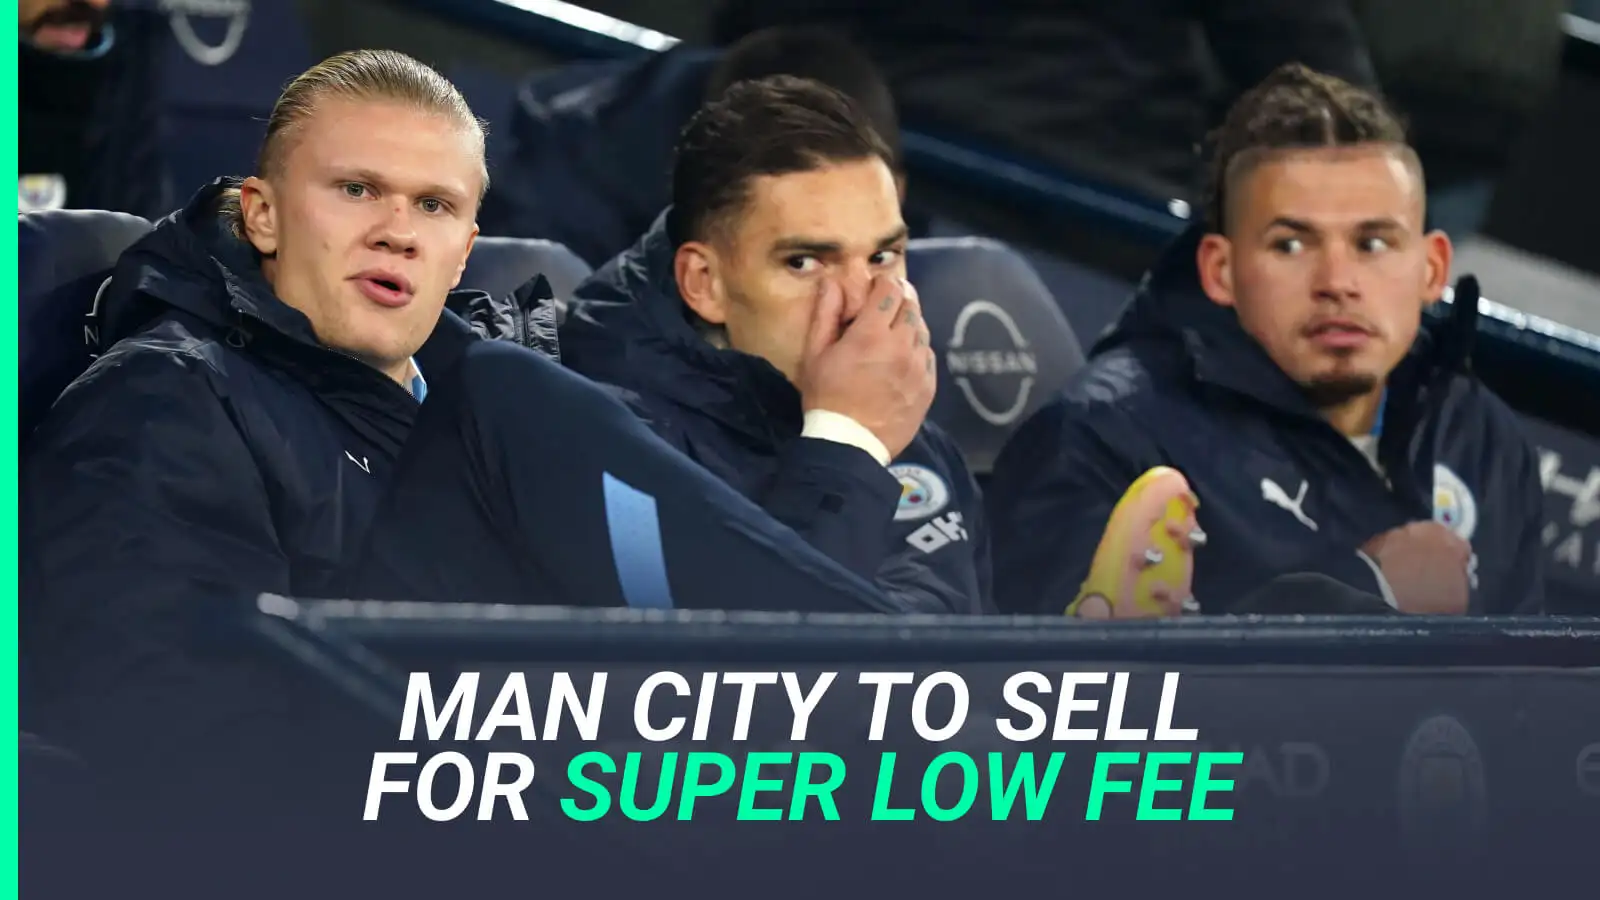 Man City put fallen star up for sale; stunning new price tag would’ve been among ‘deals of the century’ 18 months ago